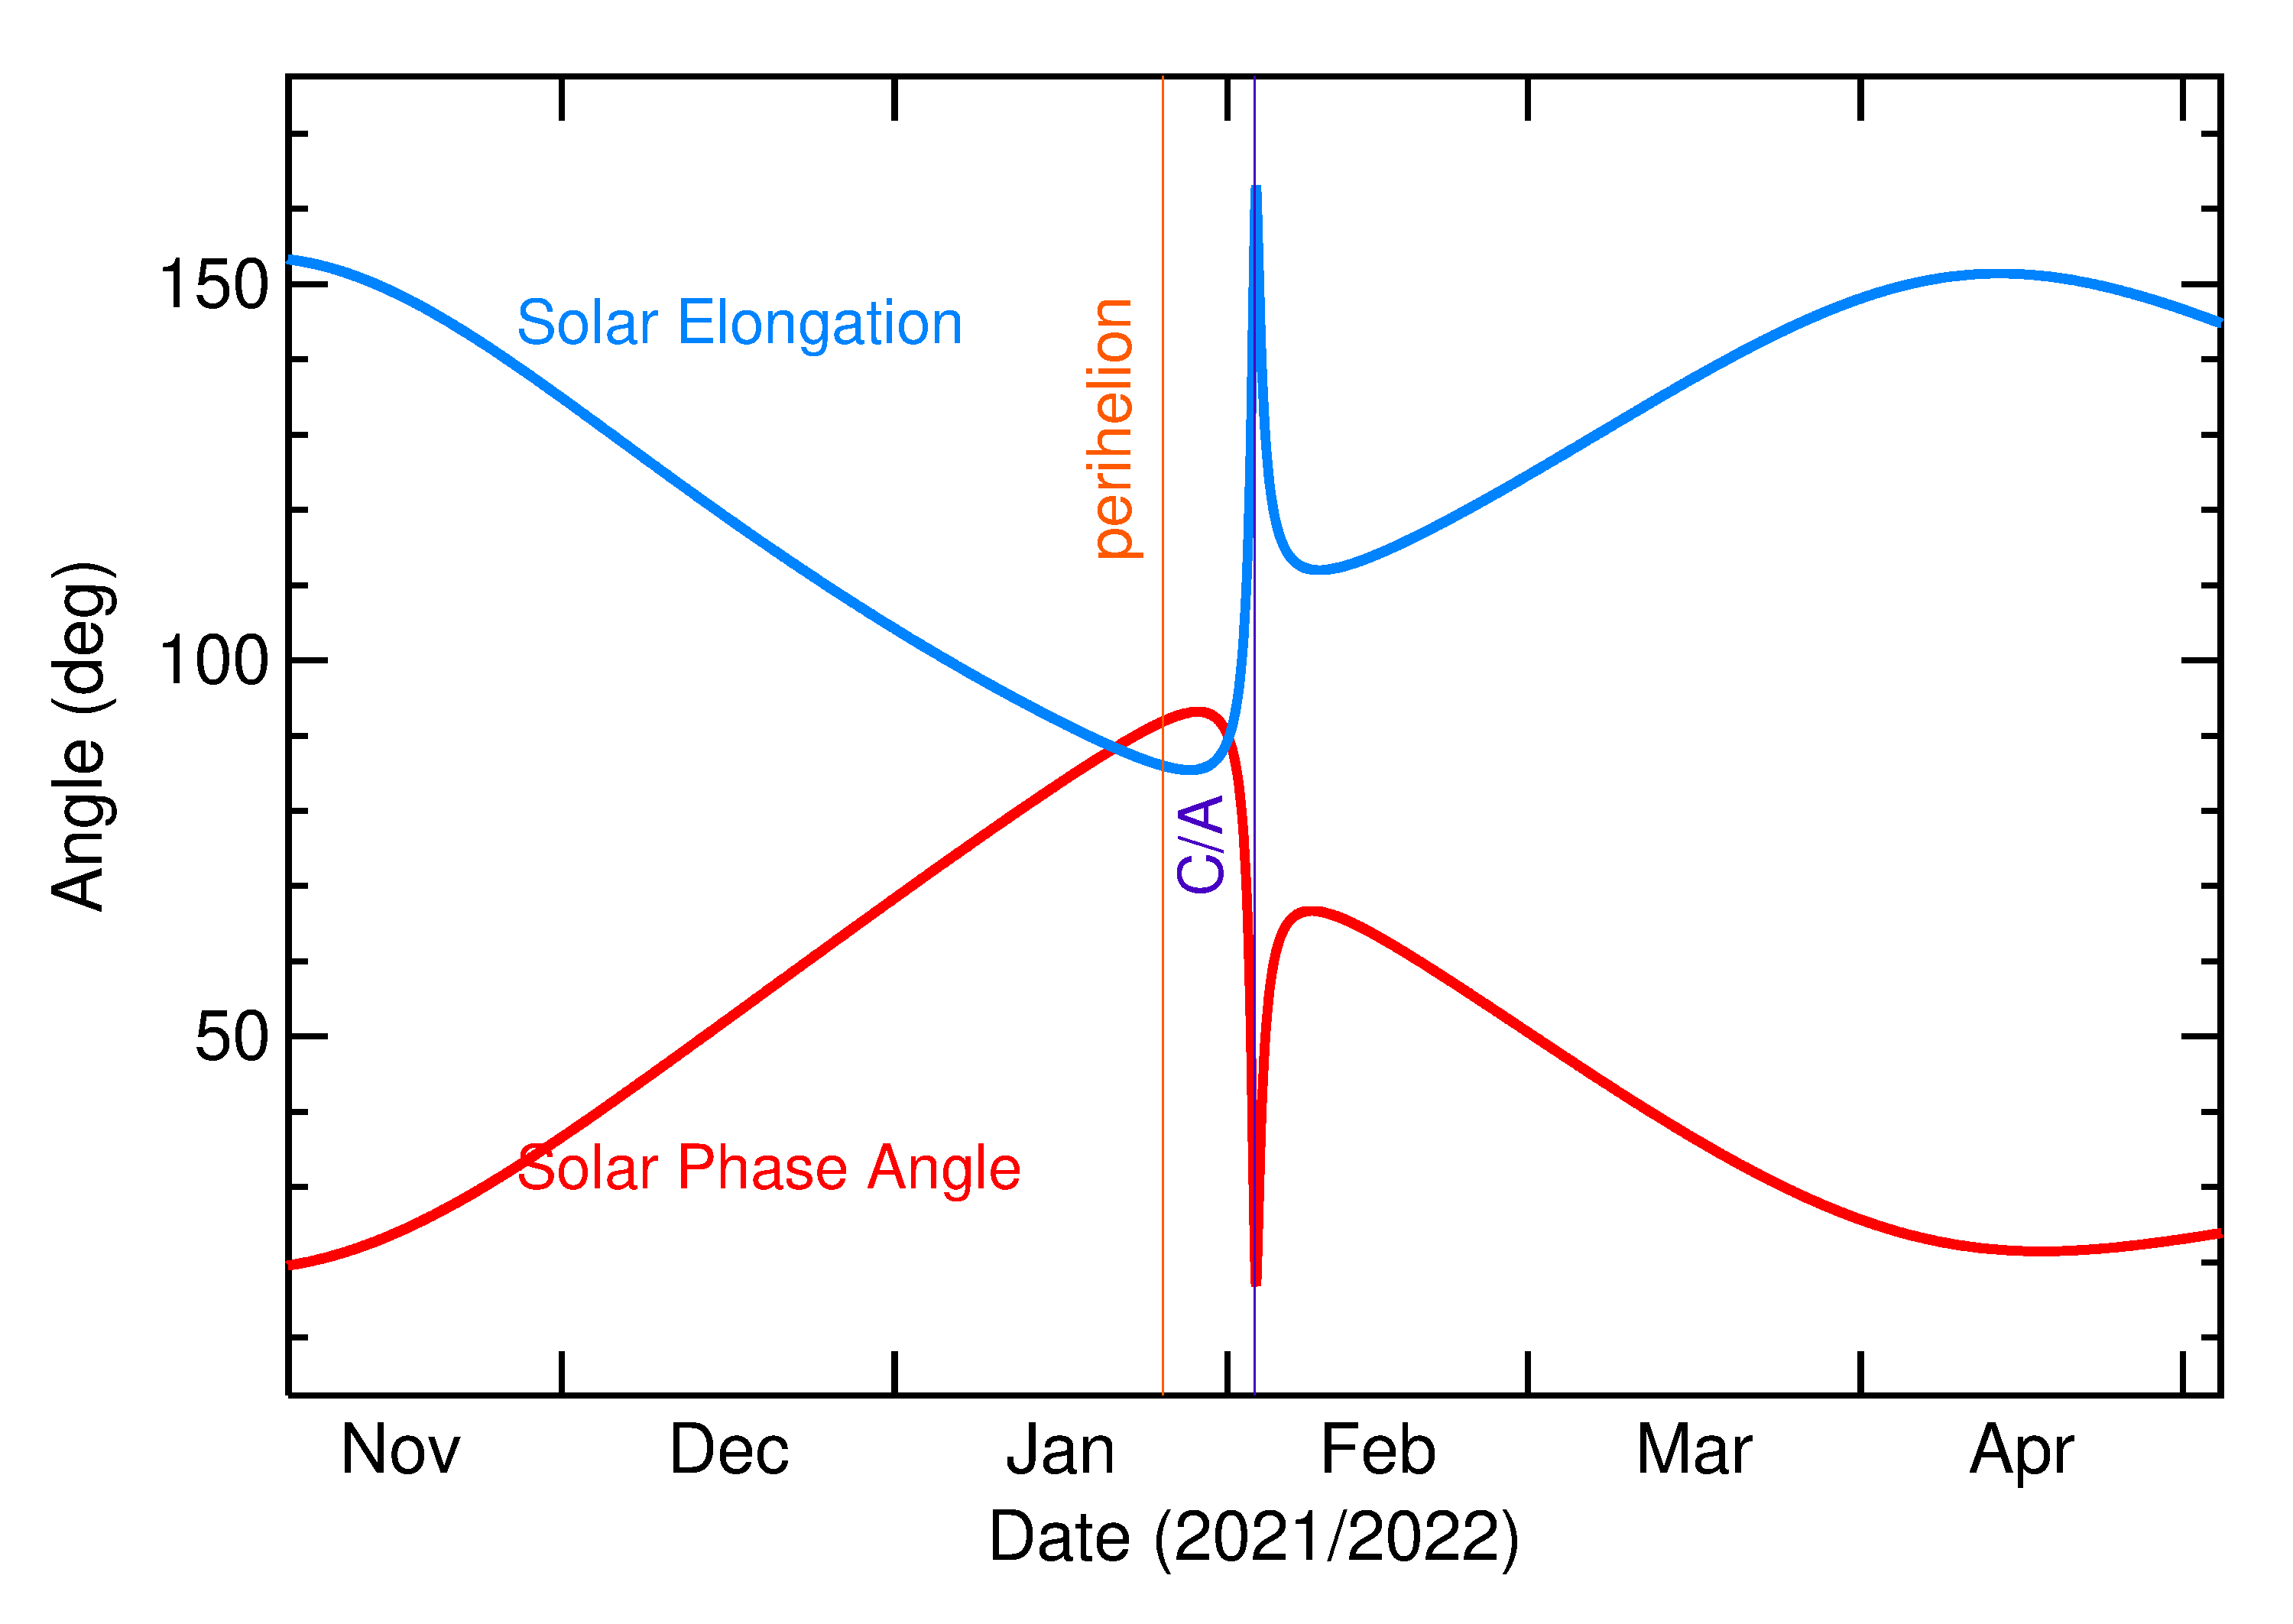 Solar Elongation and Solar Phase Angle of 2022 CG in the months around closest approach